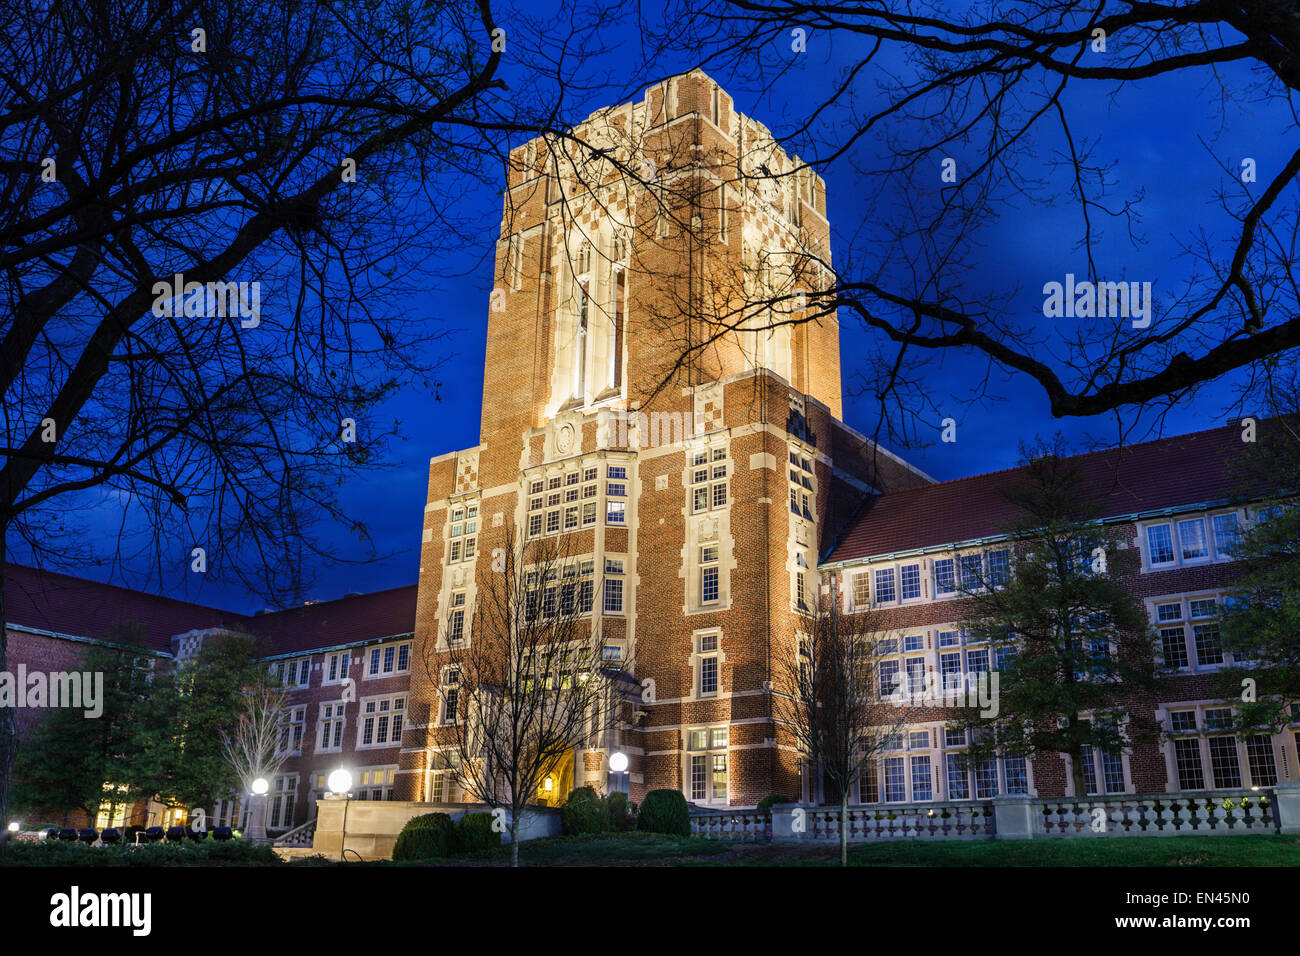 the-hill-university-of-tennessee-knoxville-tennessee-usa-stock-photo-alamy